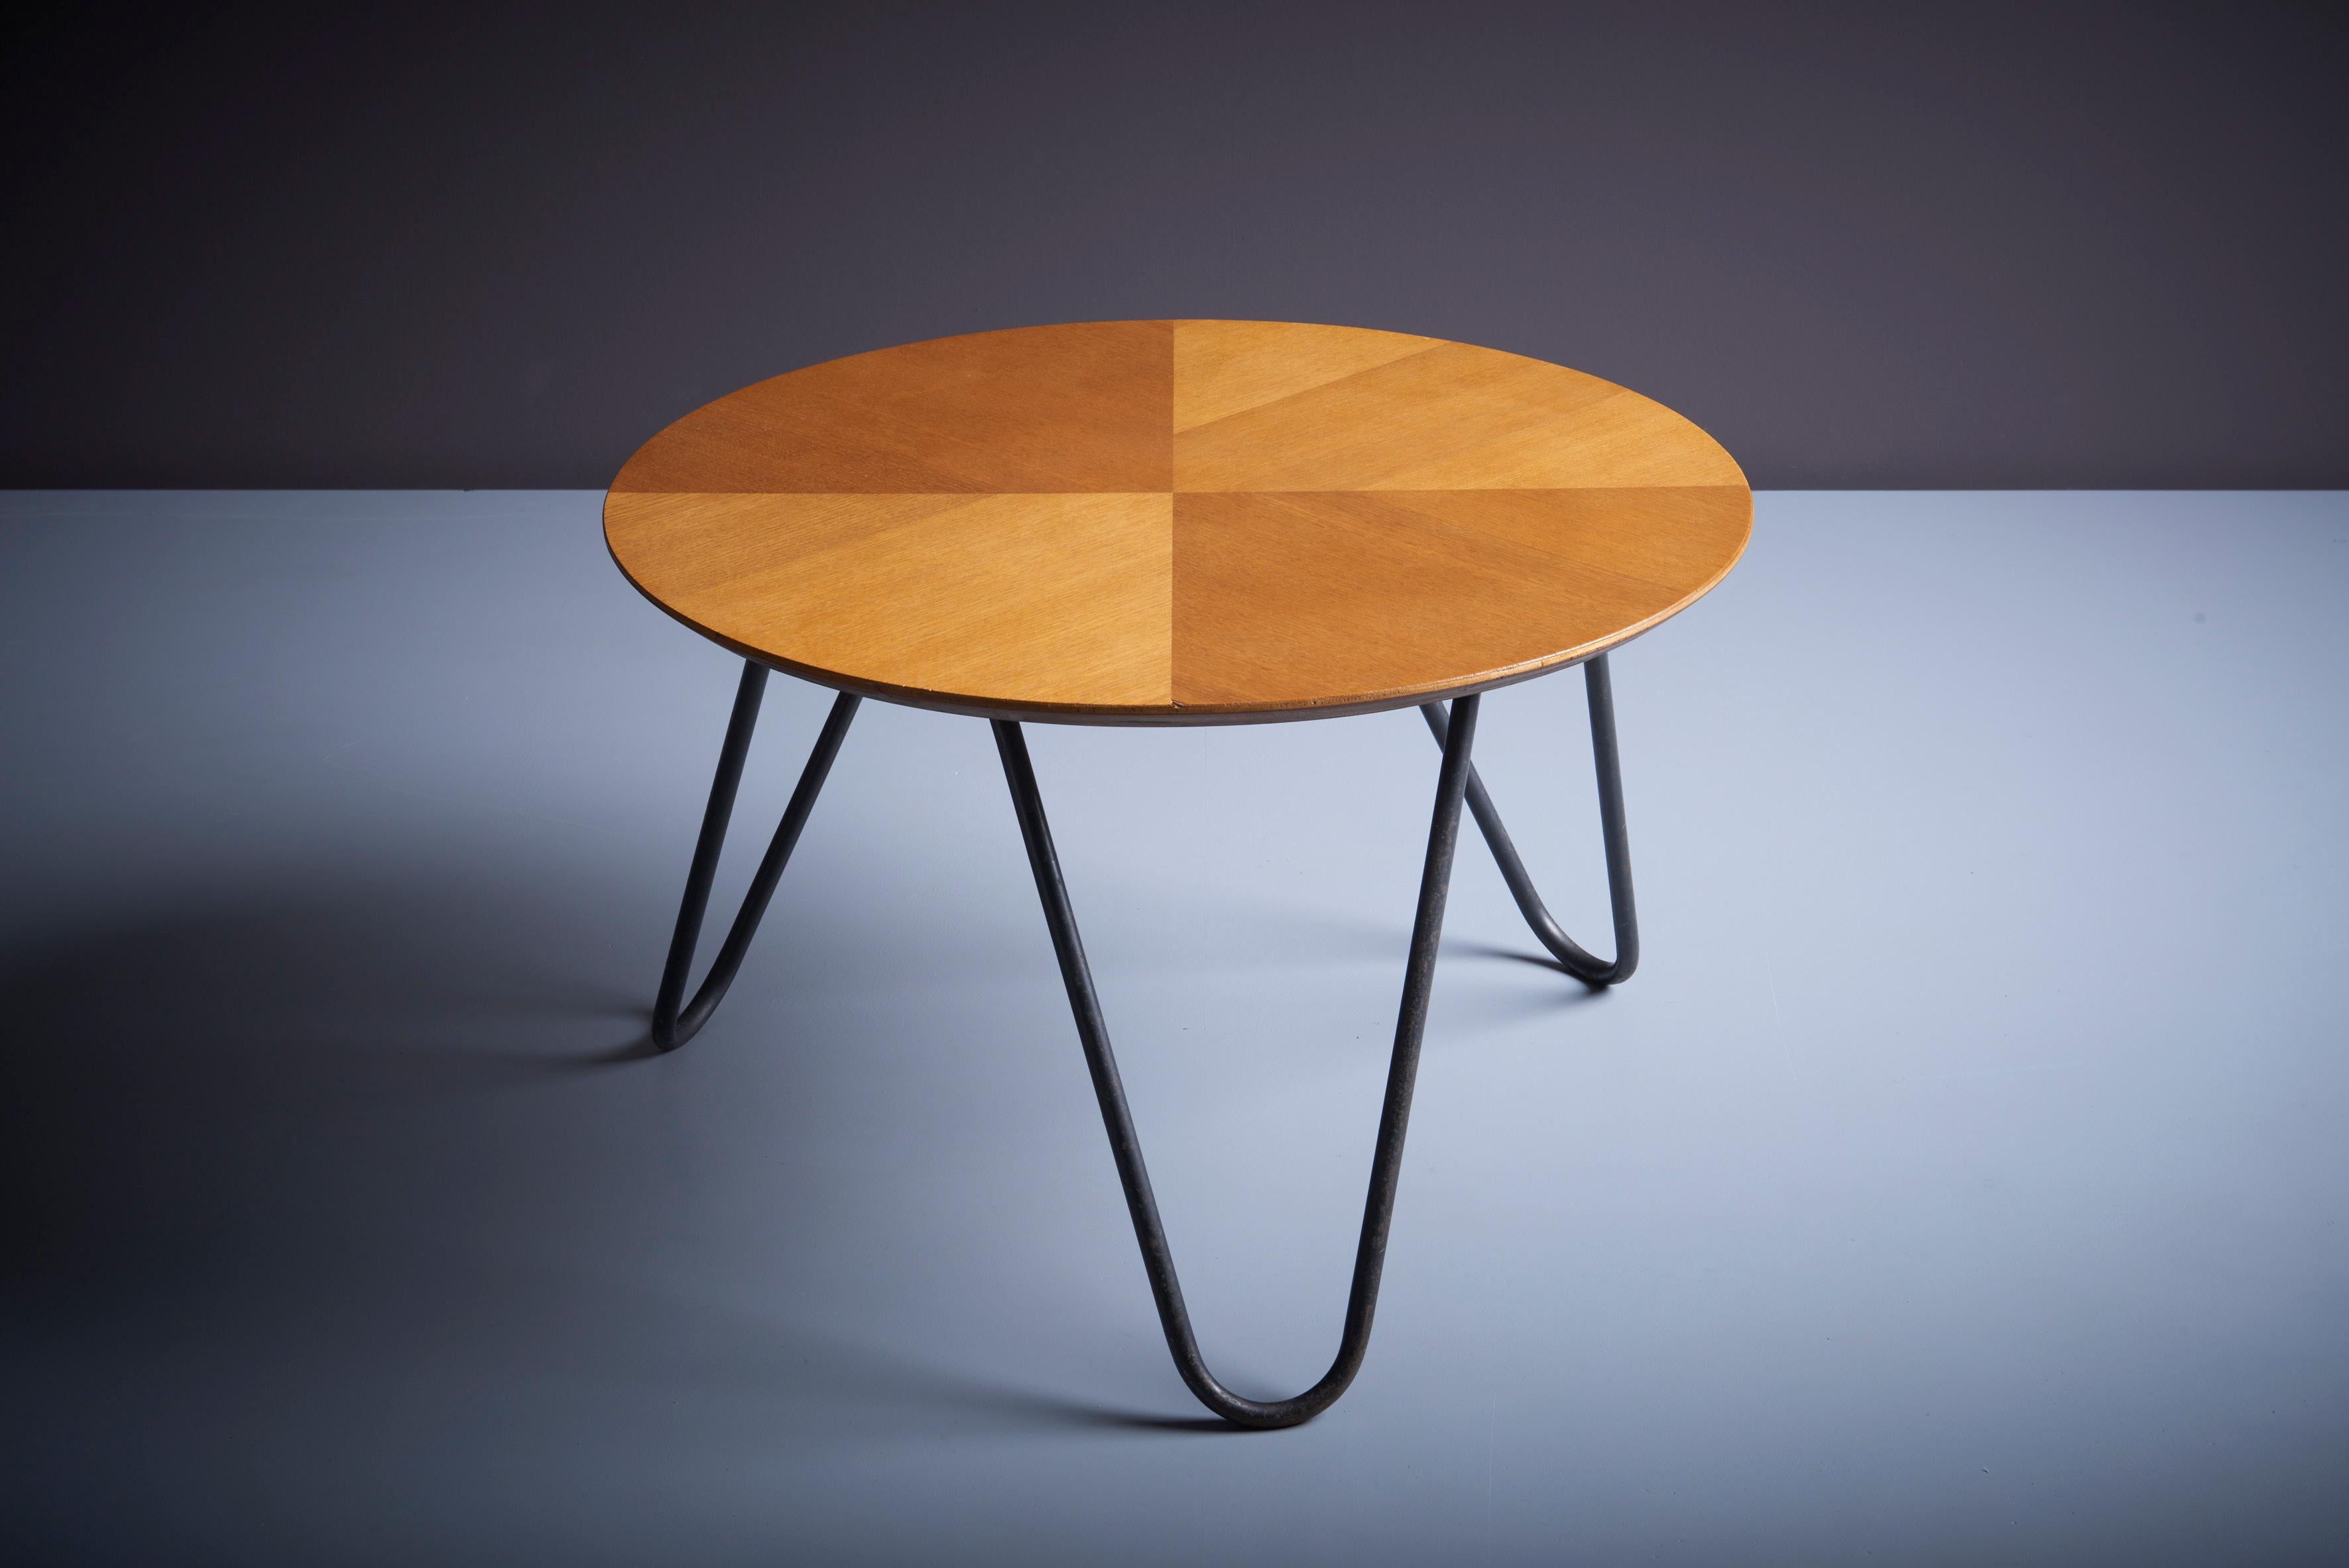 Round coffee table n ° 34, Tubauto edition, designed by Jacques Hitier. The top is in oak veneer plywood, the base in tubular black lacquered metal. Jacques Hitier (1917-1999) was a French industrial designer who worked primarily in the mid-20th